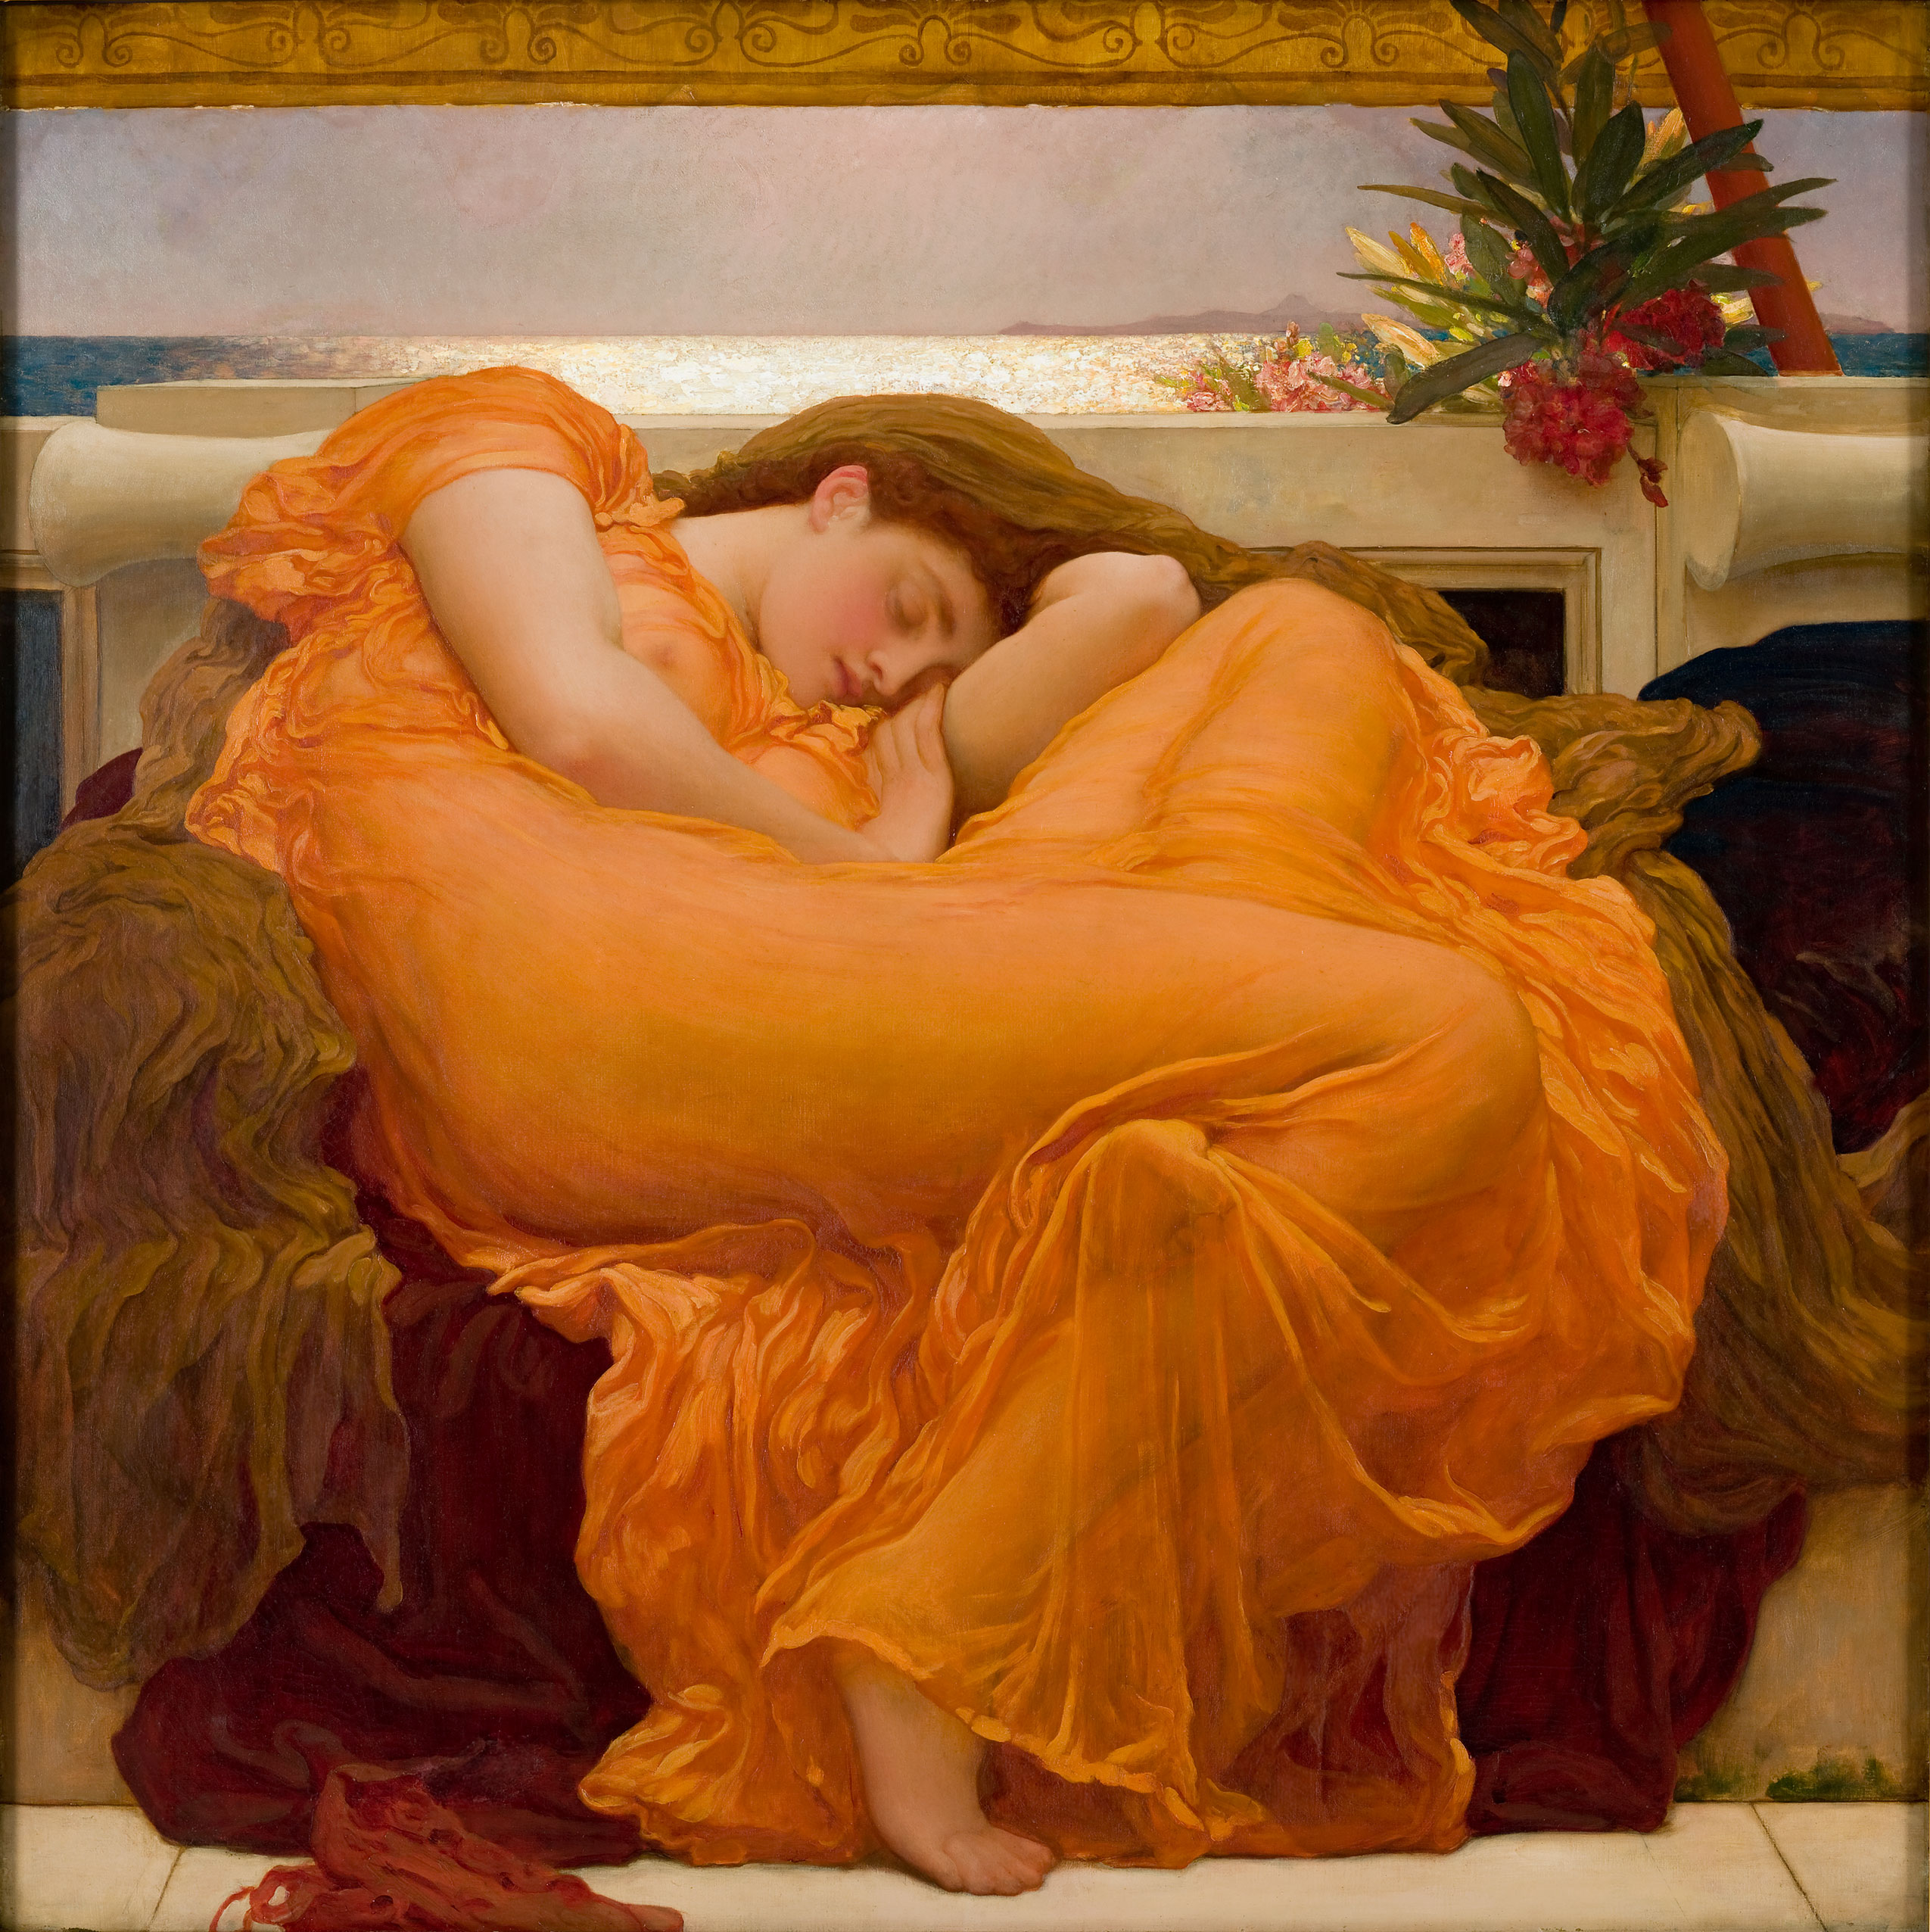 Flaming June,_by Frederic Lord Leighton (1830-1896)